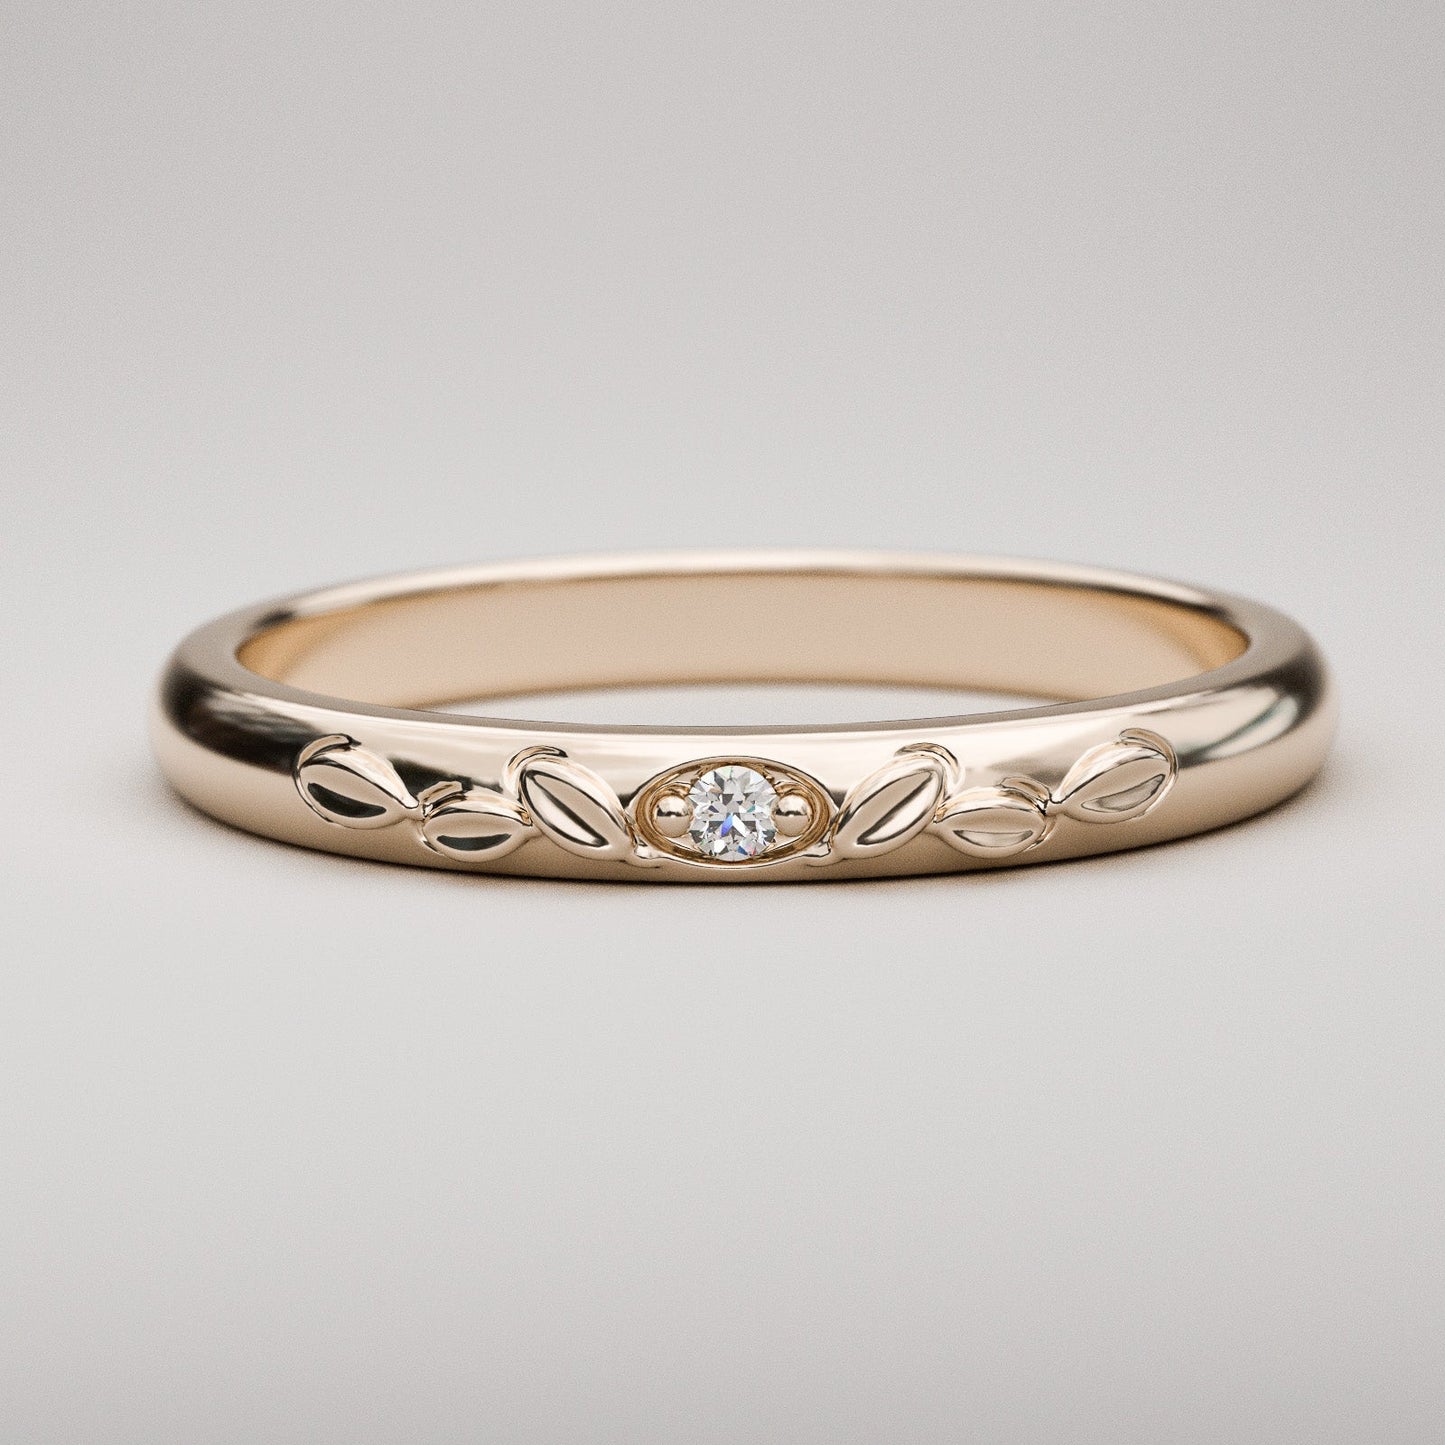 Classic domed rose gold band with genuine diamond and leaf details